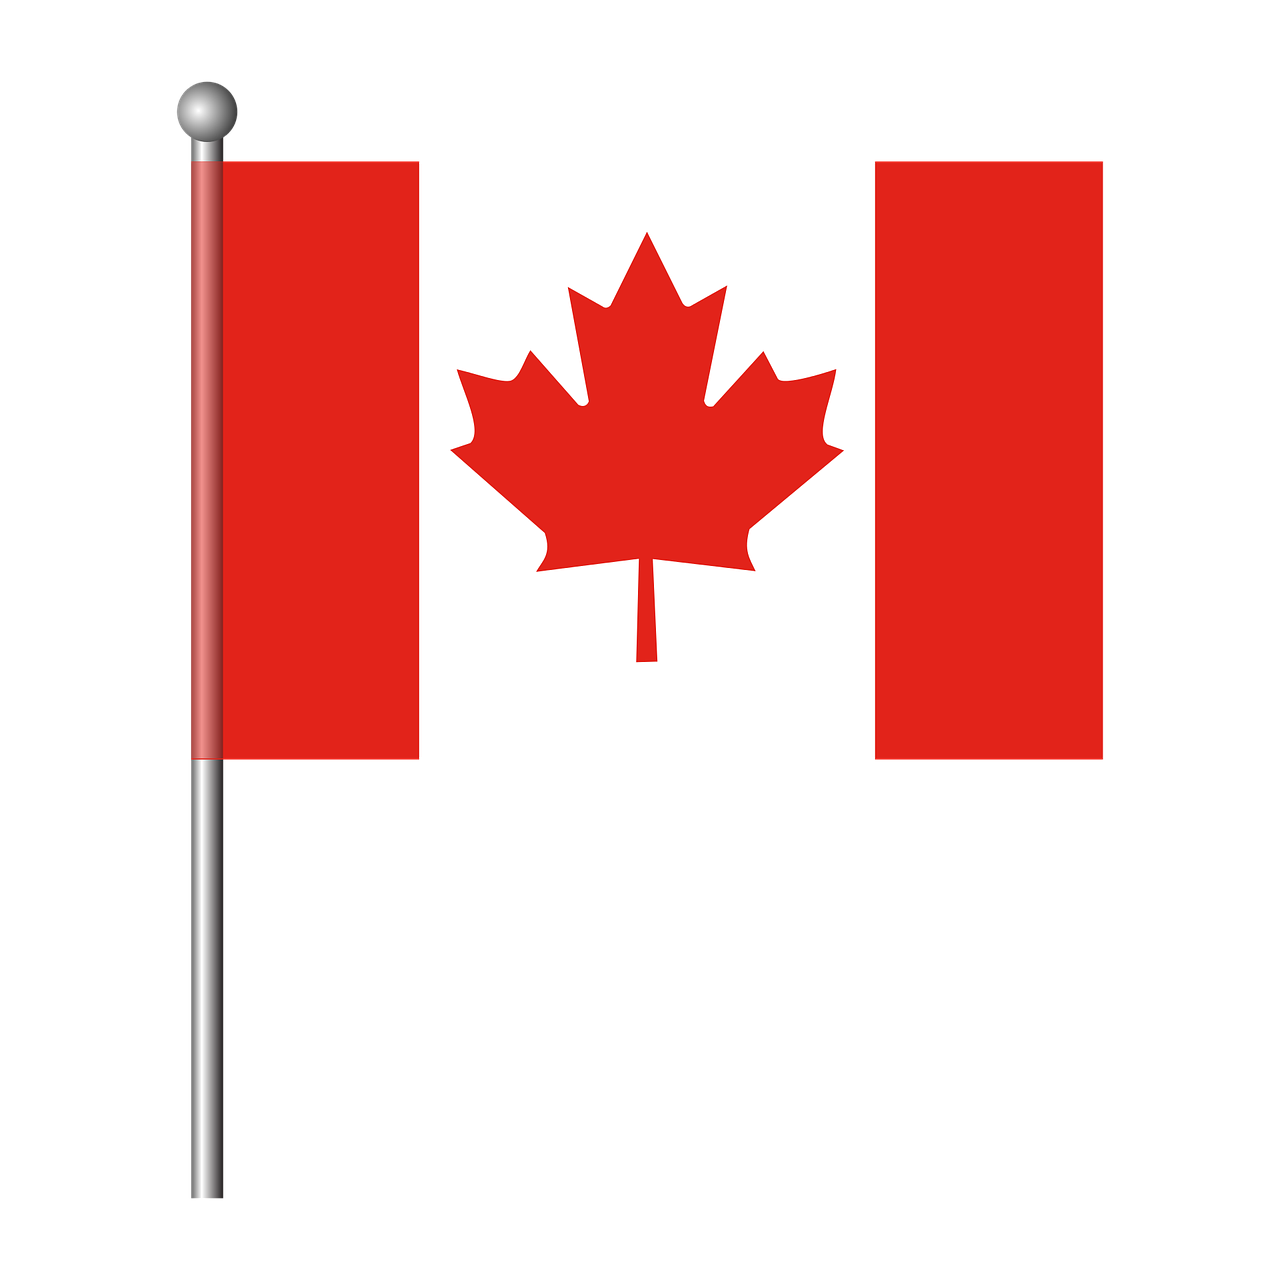 a canadian flag on a pole on a black background, an illustration of, hurufiyya, an illustration, handheld, illustration, accurate depiction